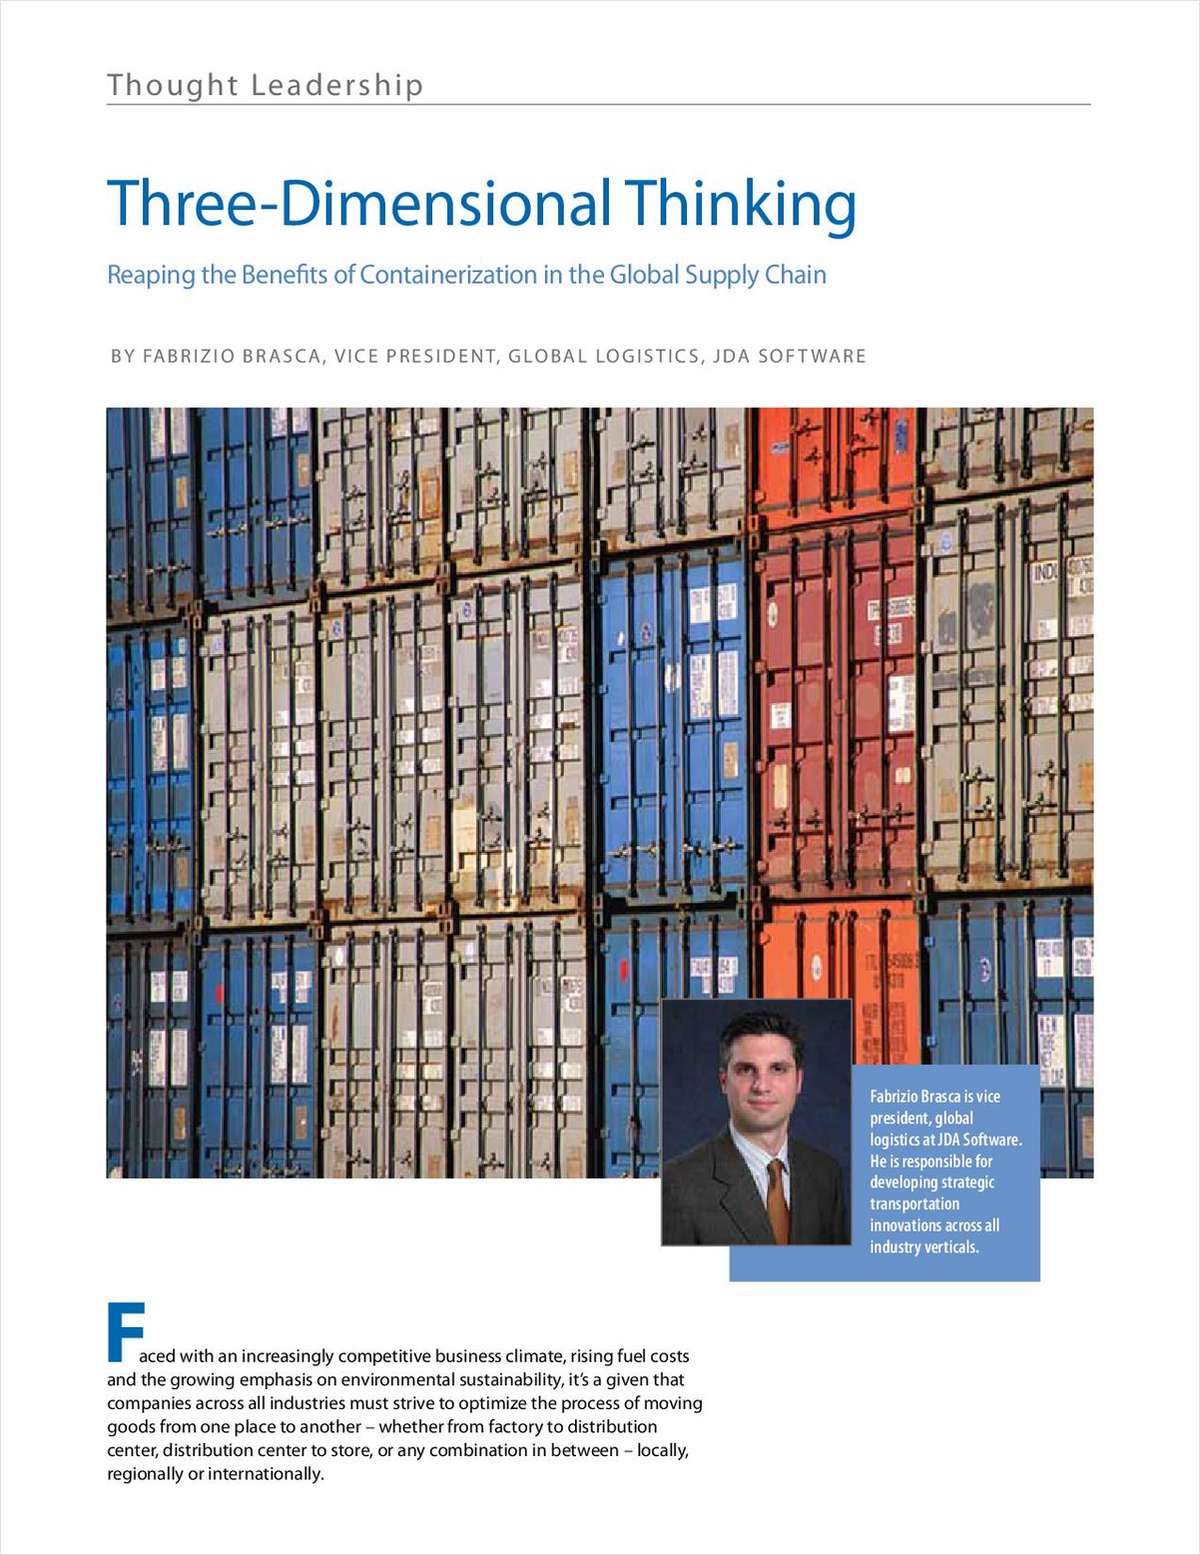 Three Dimensional Thinking: Reaping the Benefits of Containerization in the Global Supply Chain